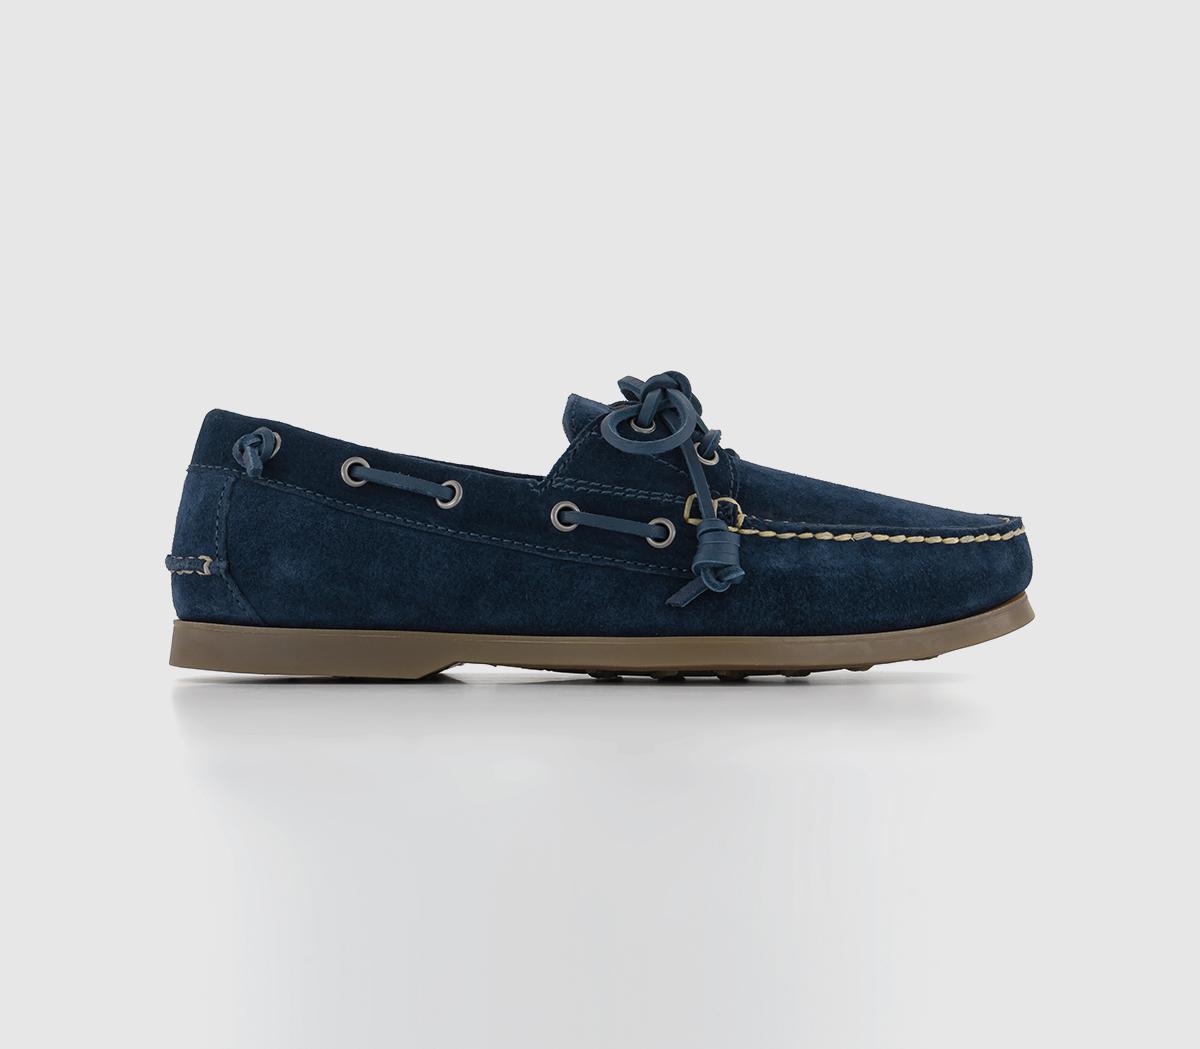 Polo Ralph LaurenMerton Shoes Newport Navy